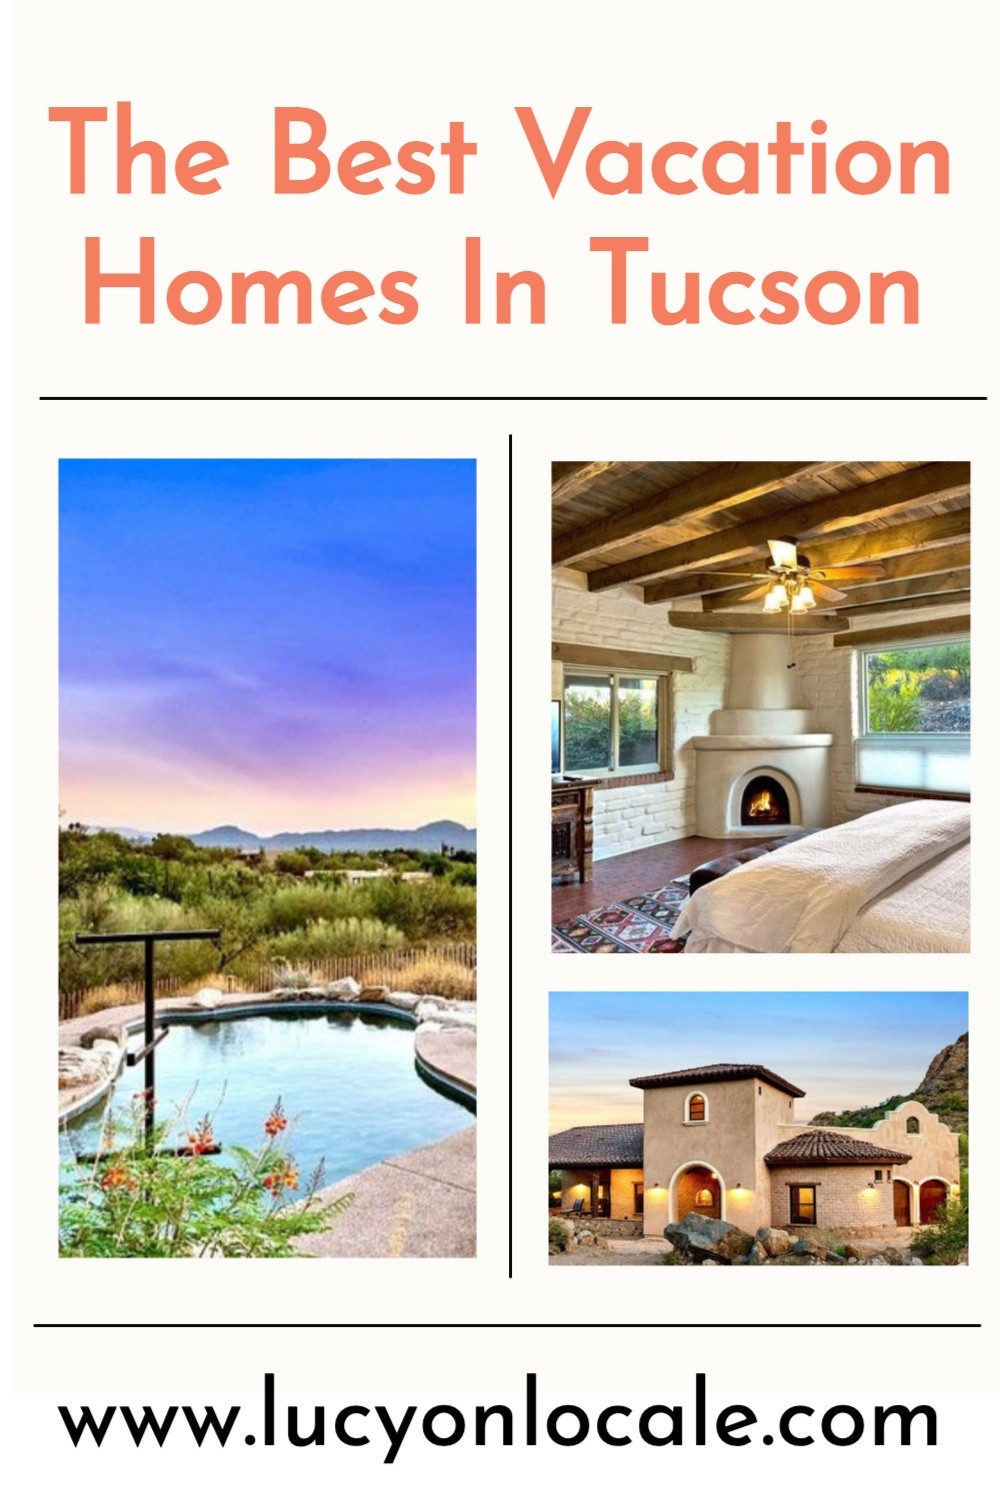 The best vacation homes in Tucson